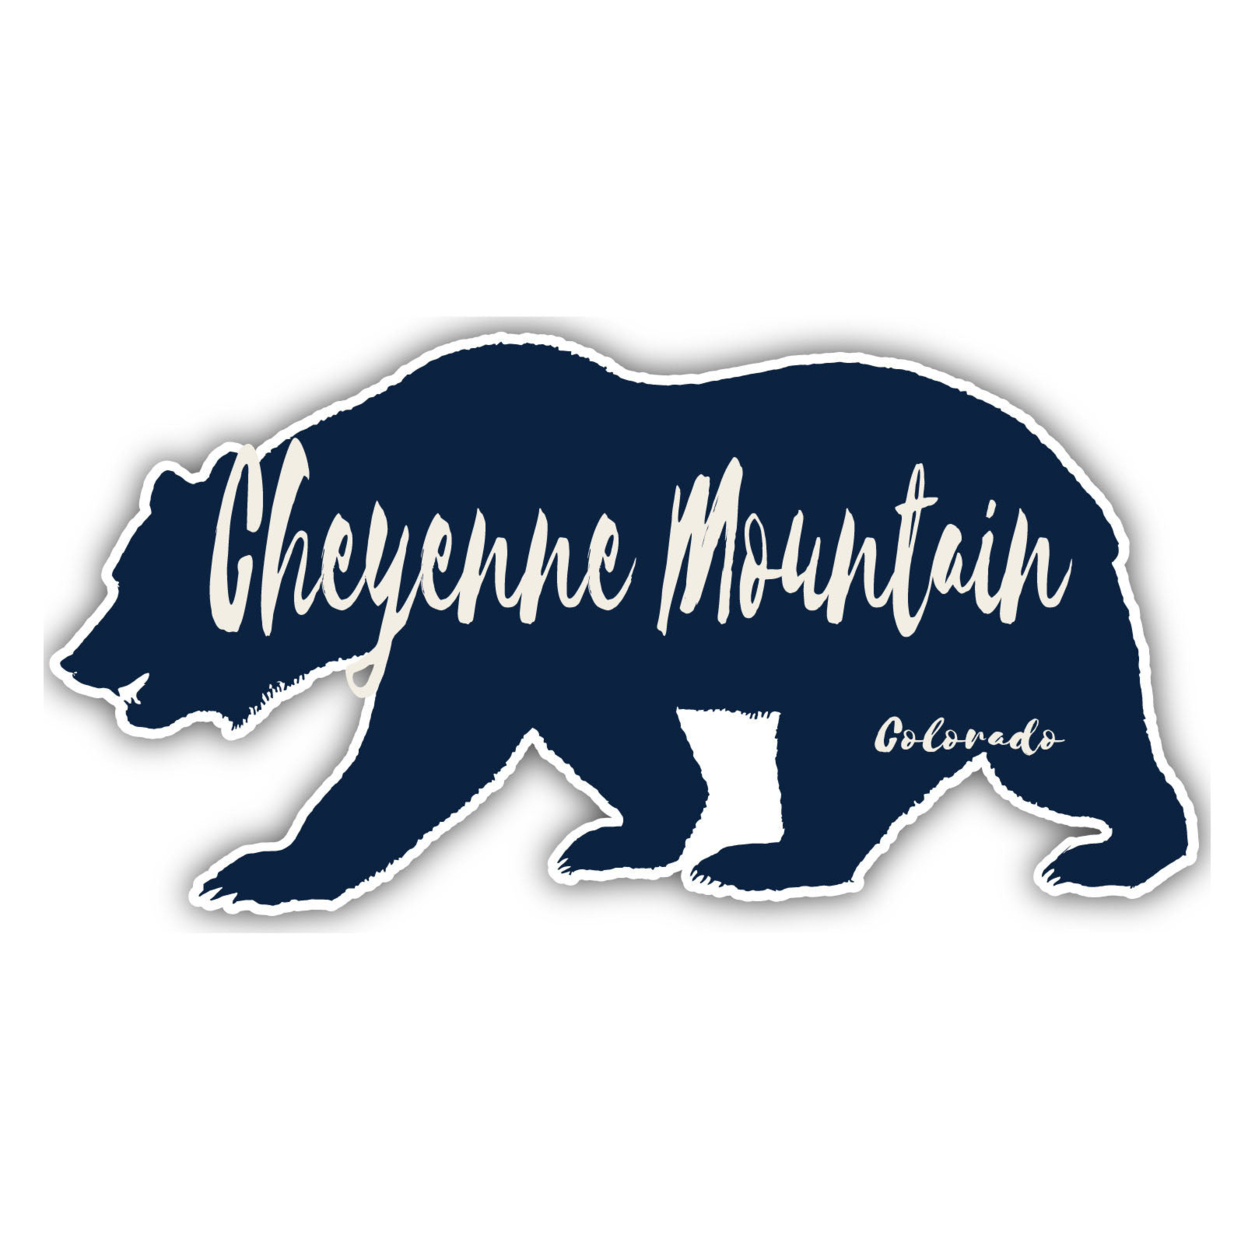 Cheyenne Mountain Colorado Souvenir Decorative Stickers (Choose Theme And Size) - 4-Pack, 2-Inch, Camp Life